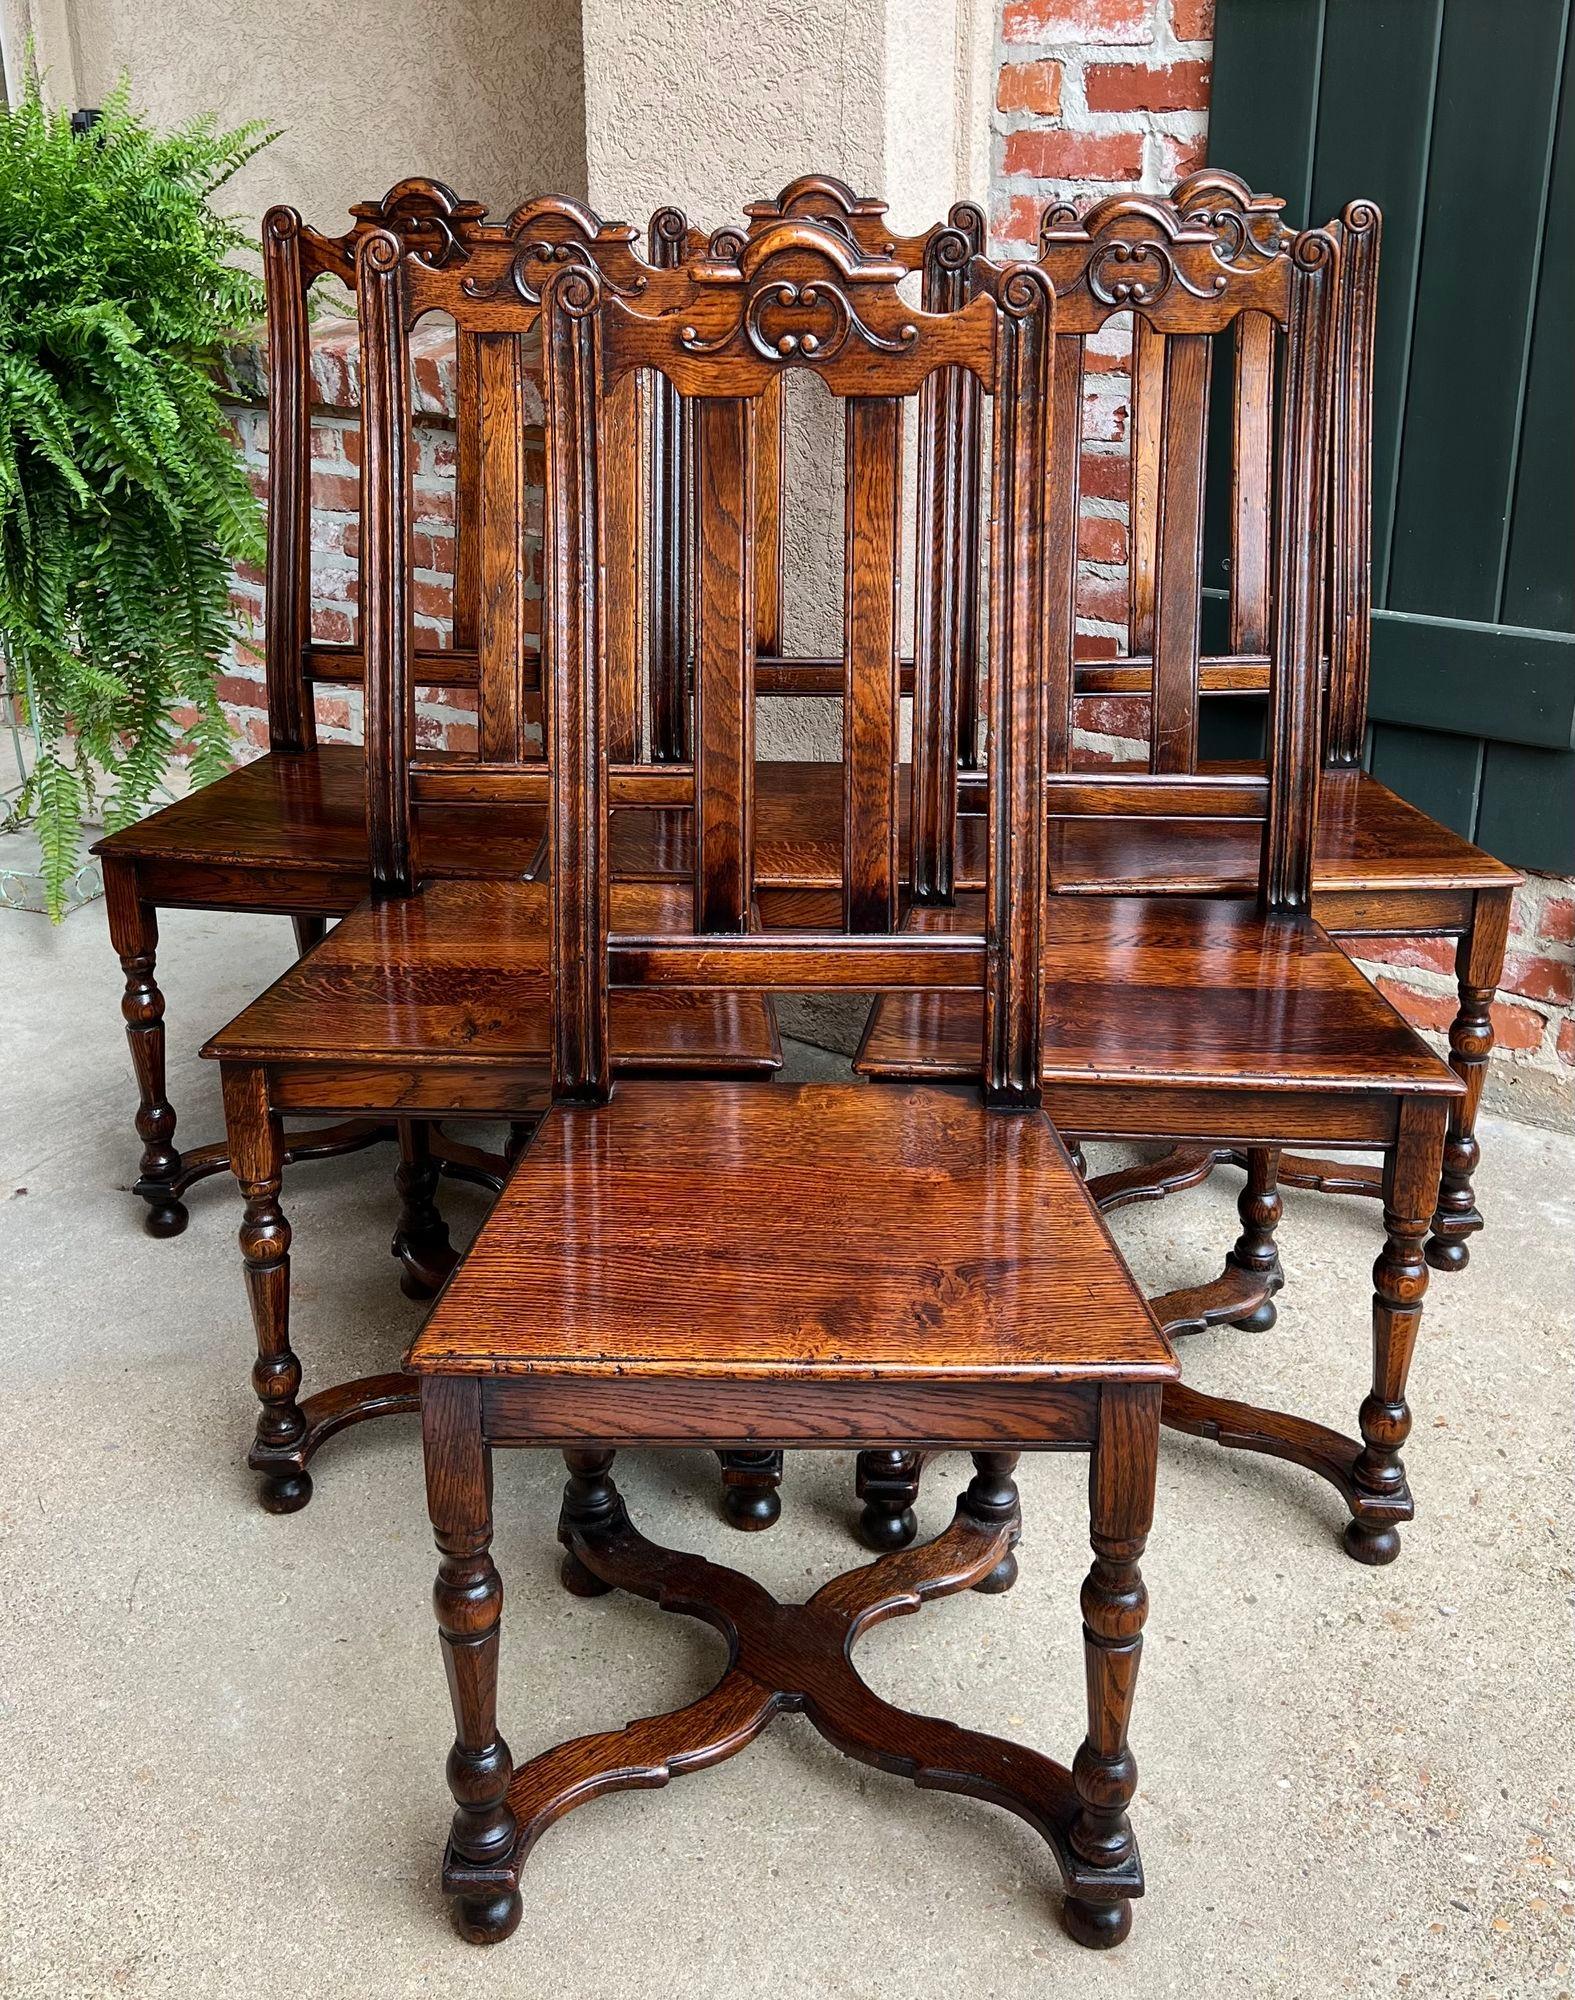 Set 6 antique French provincial Country style dining chairs carved oak.

Direct from France, a lovely set of 6 antique French chairs, perfect for either a dining room or kitchen with their distinctive French charm. The chairs have ornate